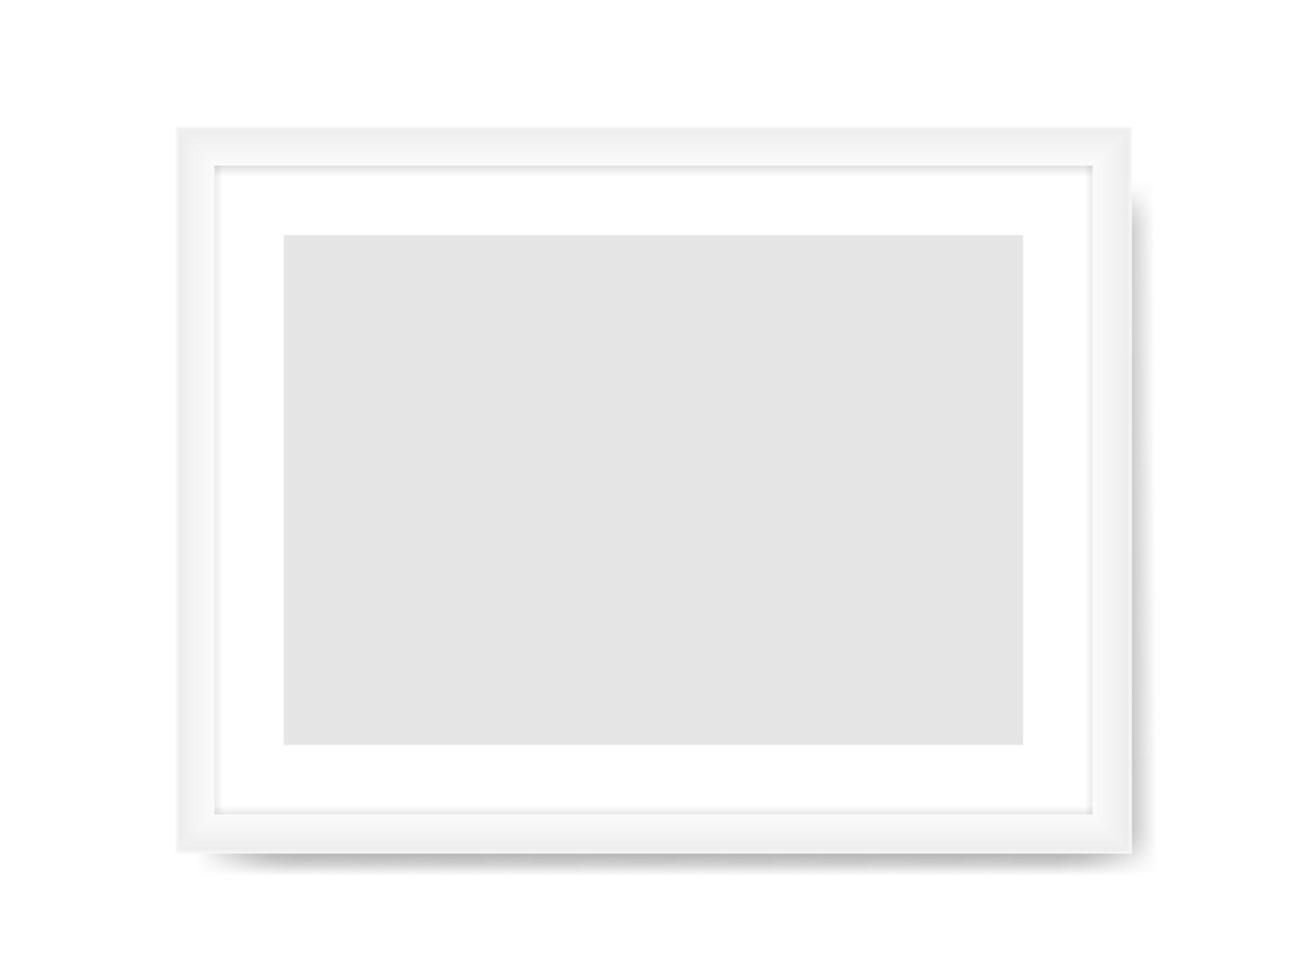 White photo frame template. Empty rectangular horizontal banner with gray center realistic design for picture and promotional vector image